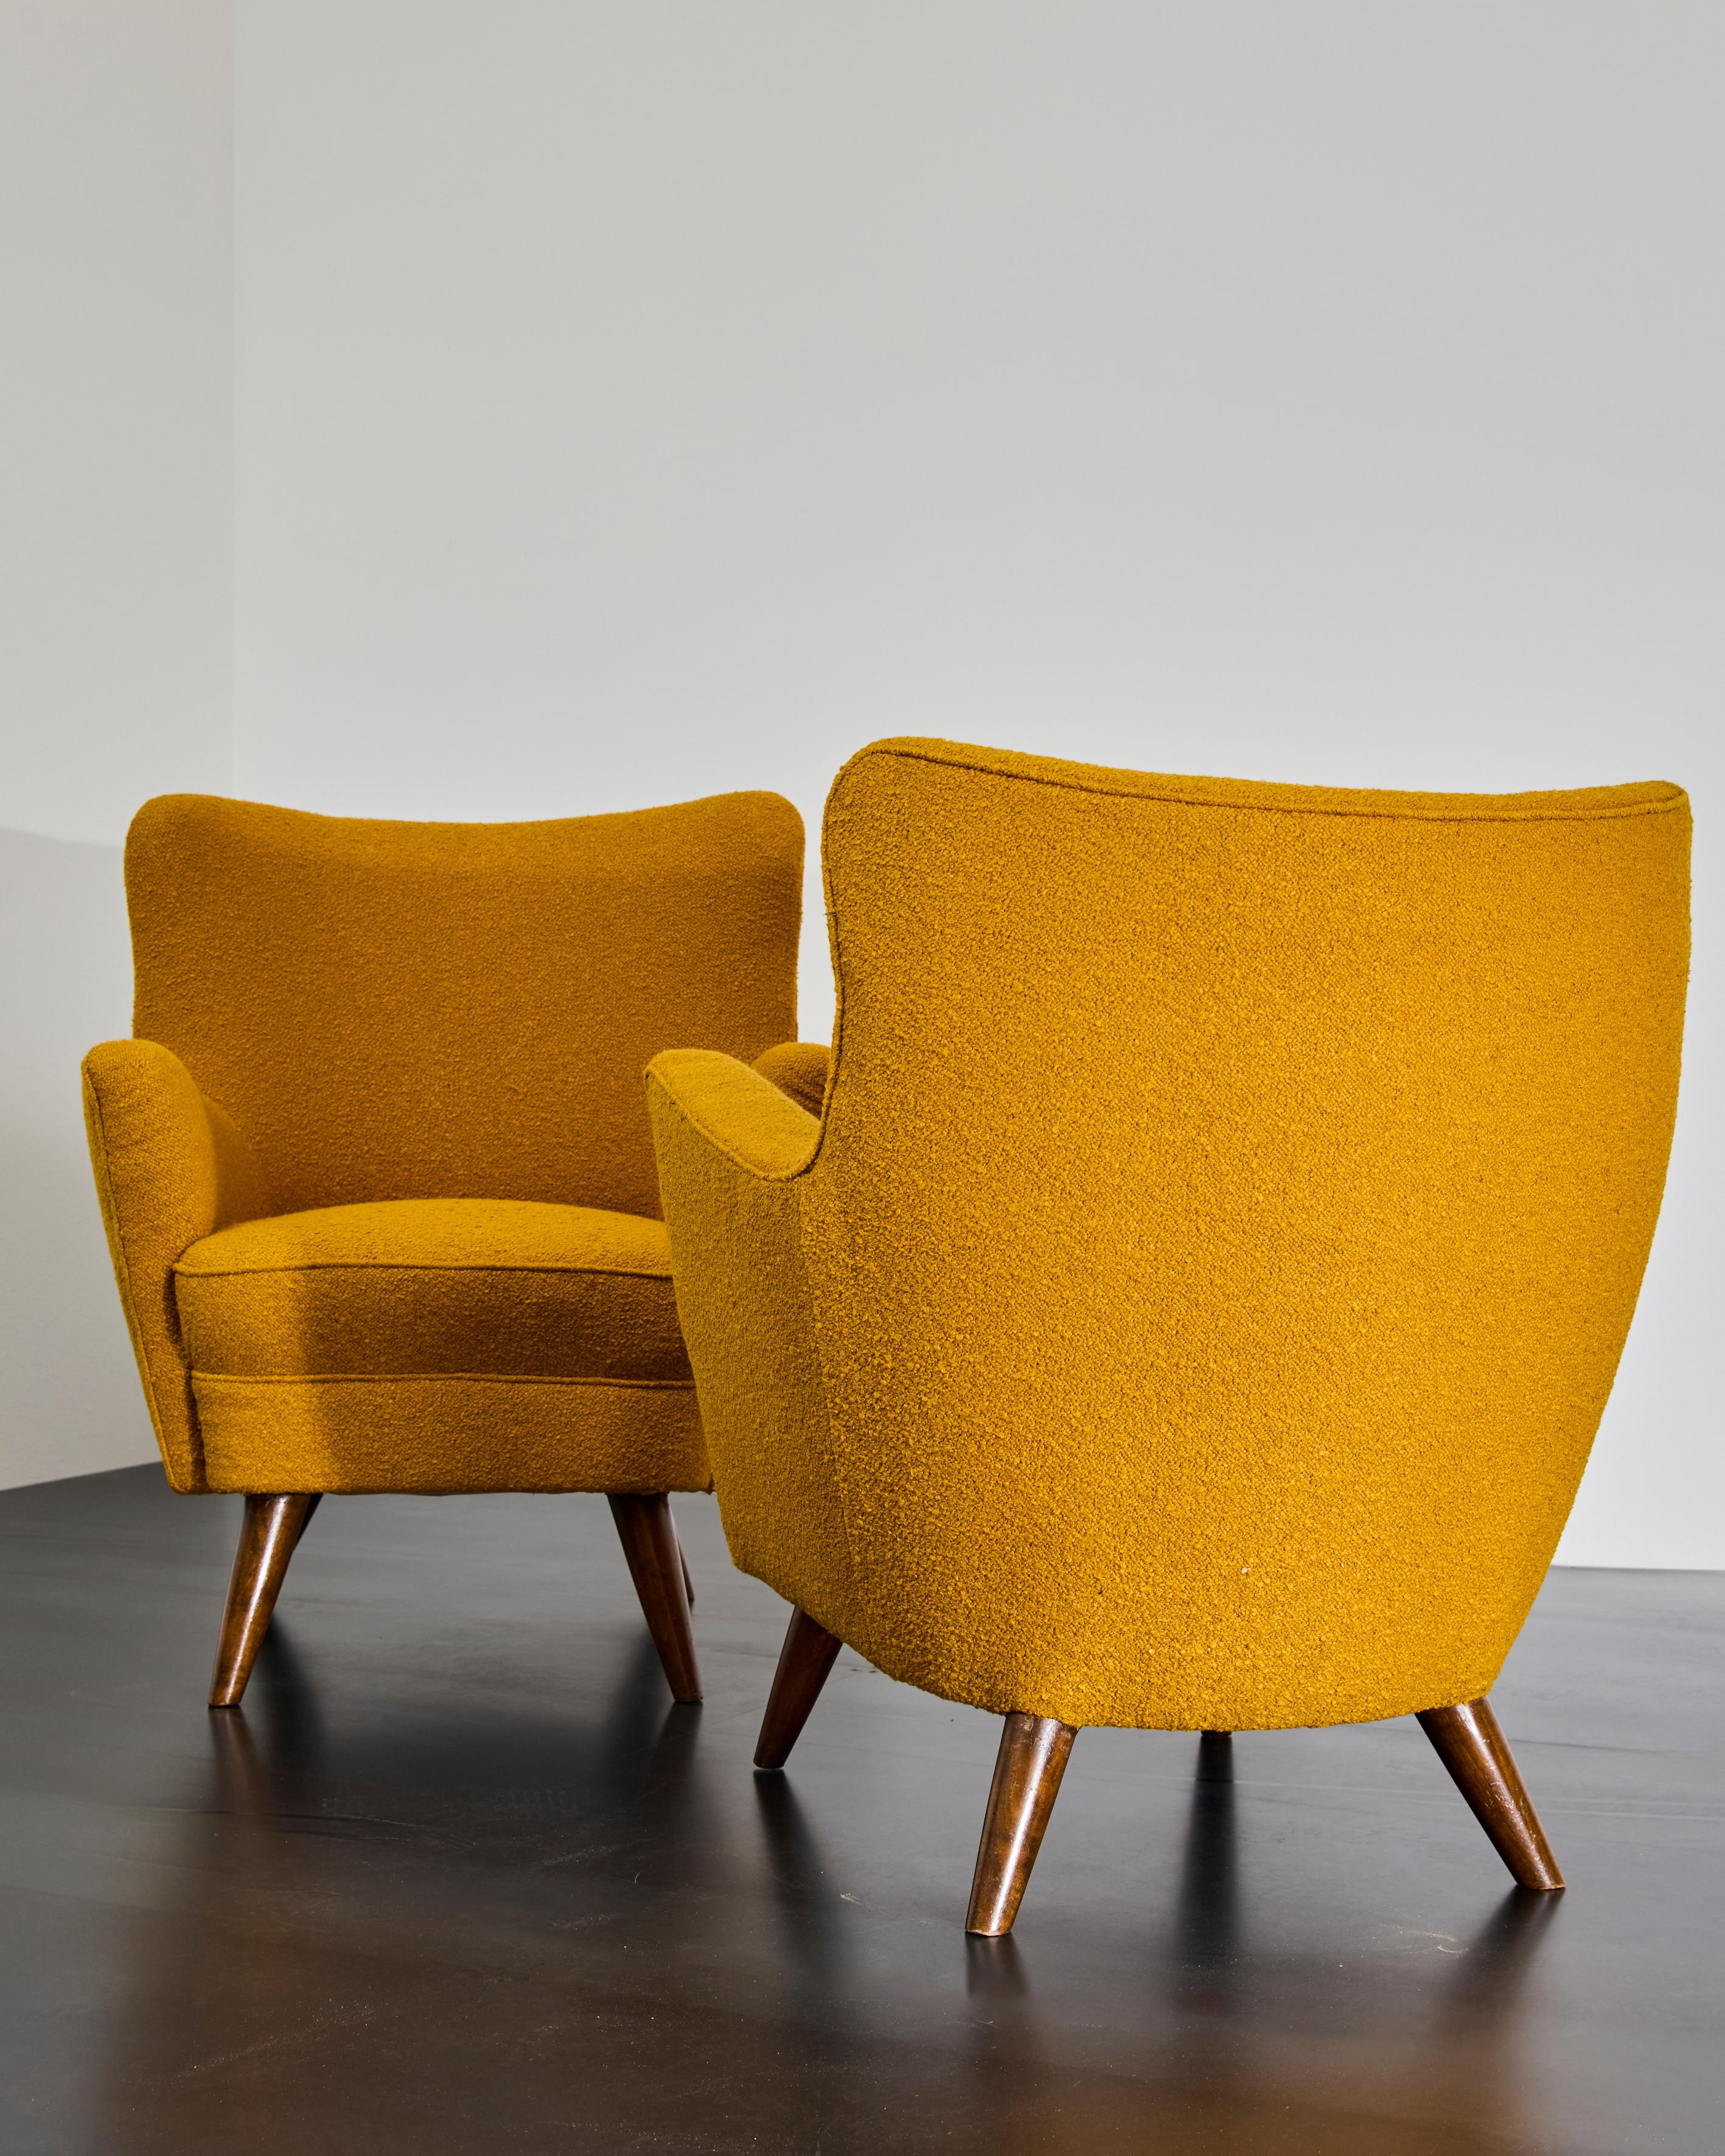 Armchairs designed by Luigi Caccia Dominioni around 1944 for a private residence in Milan; the fabric has been replaced and the wooden part of the feet, polished.